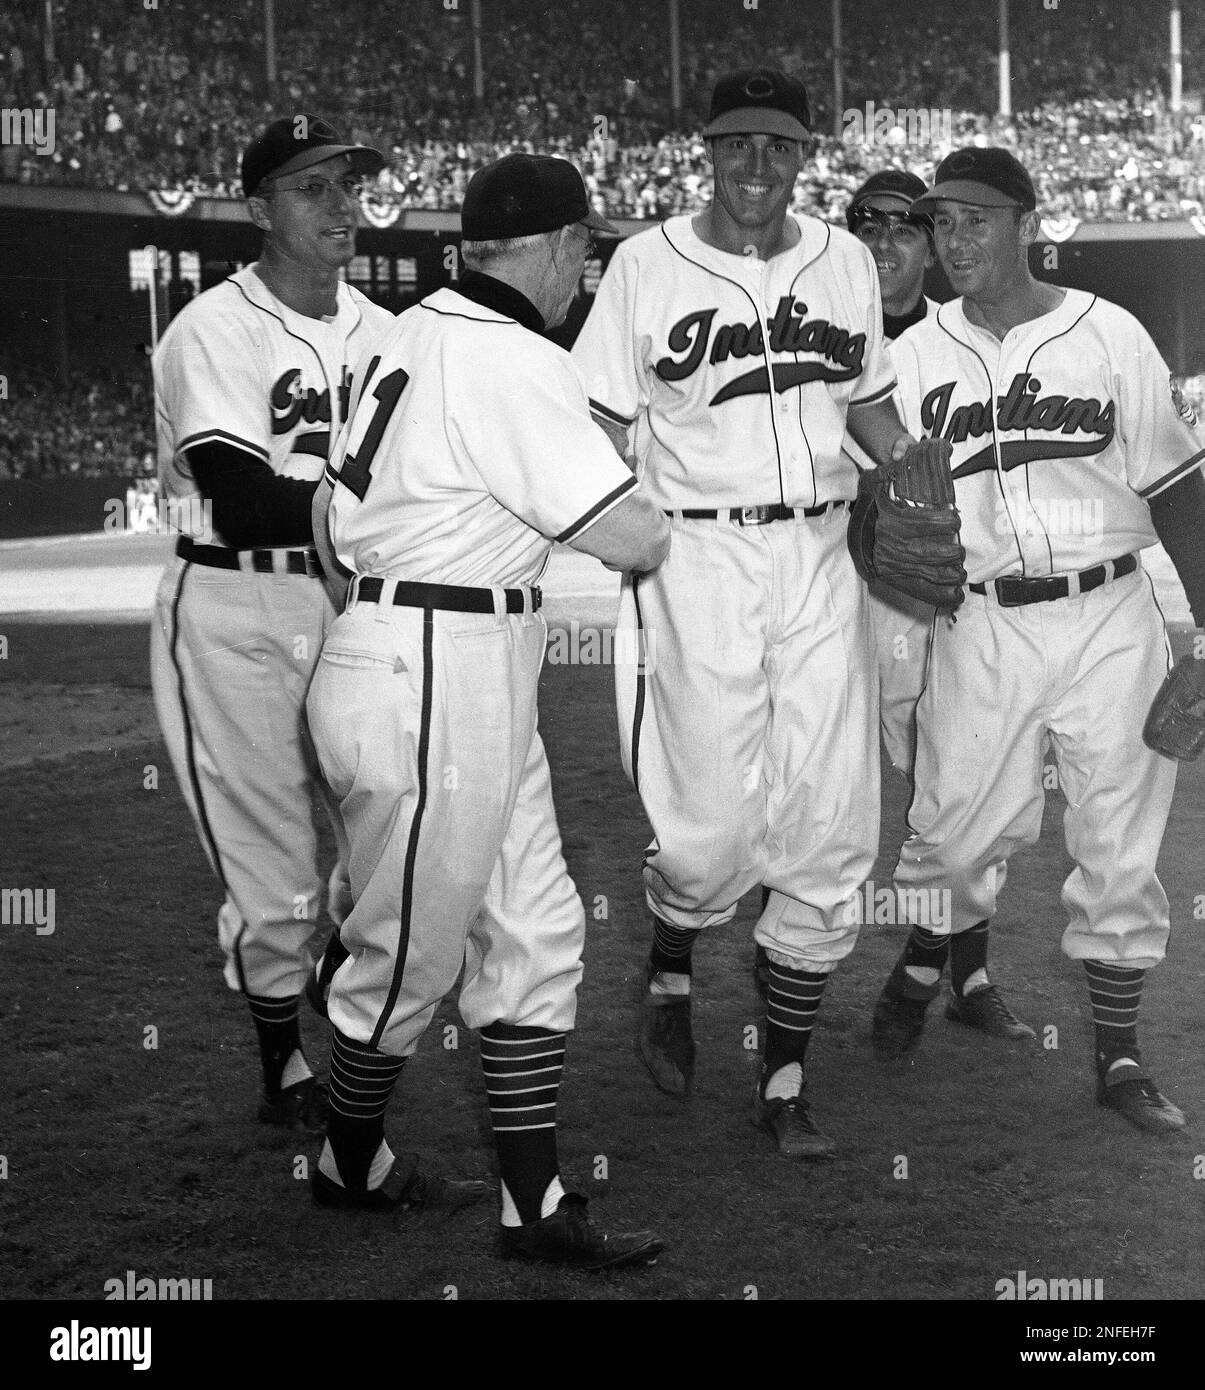 Uniforms worn for Boston Braves at Cleveland Indians on October 8